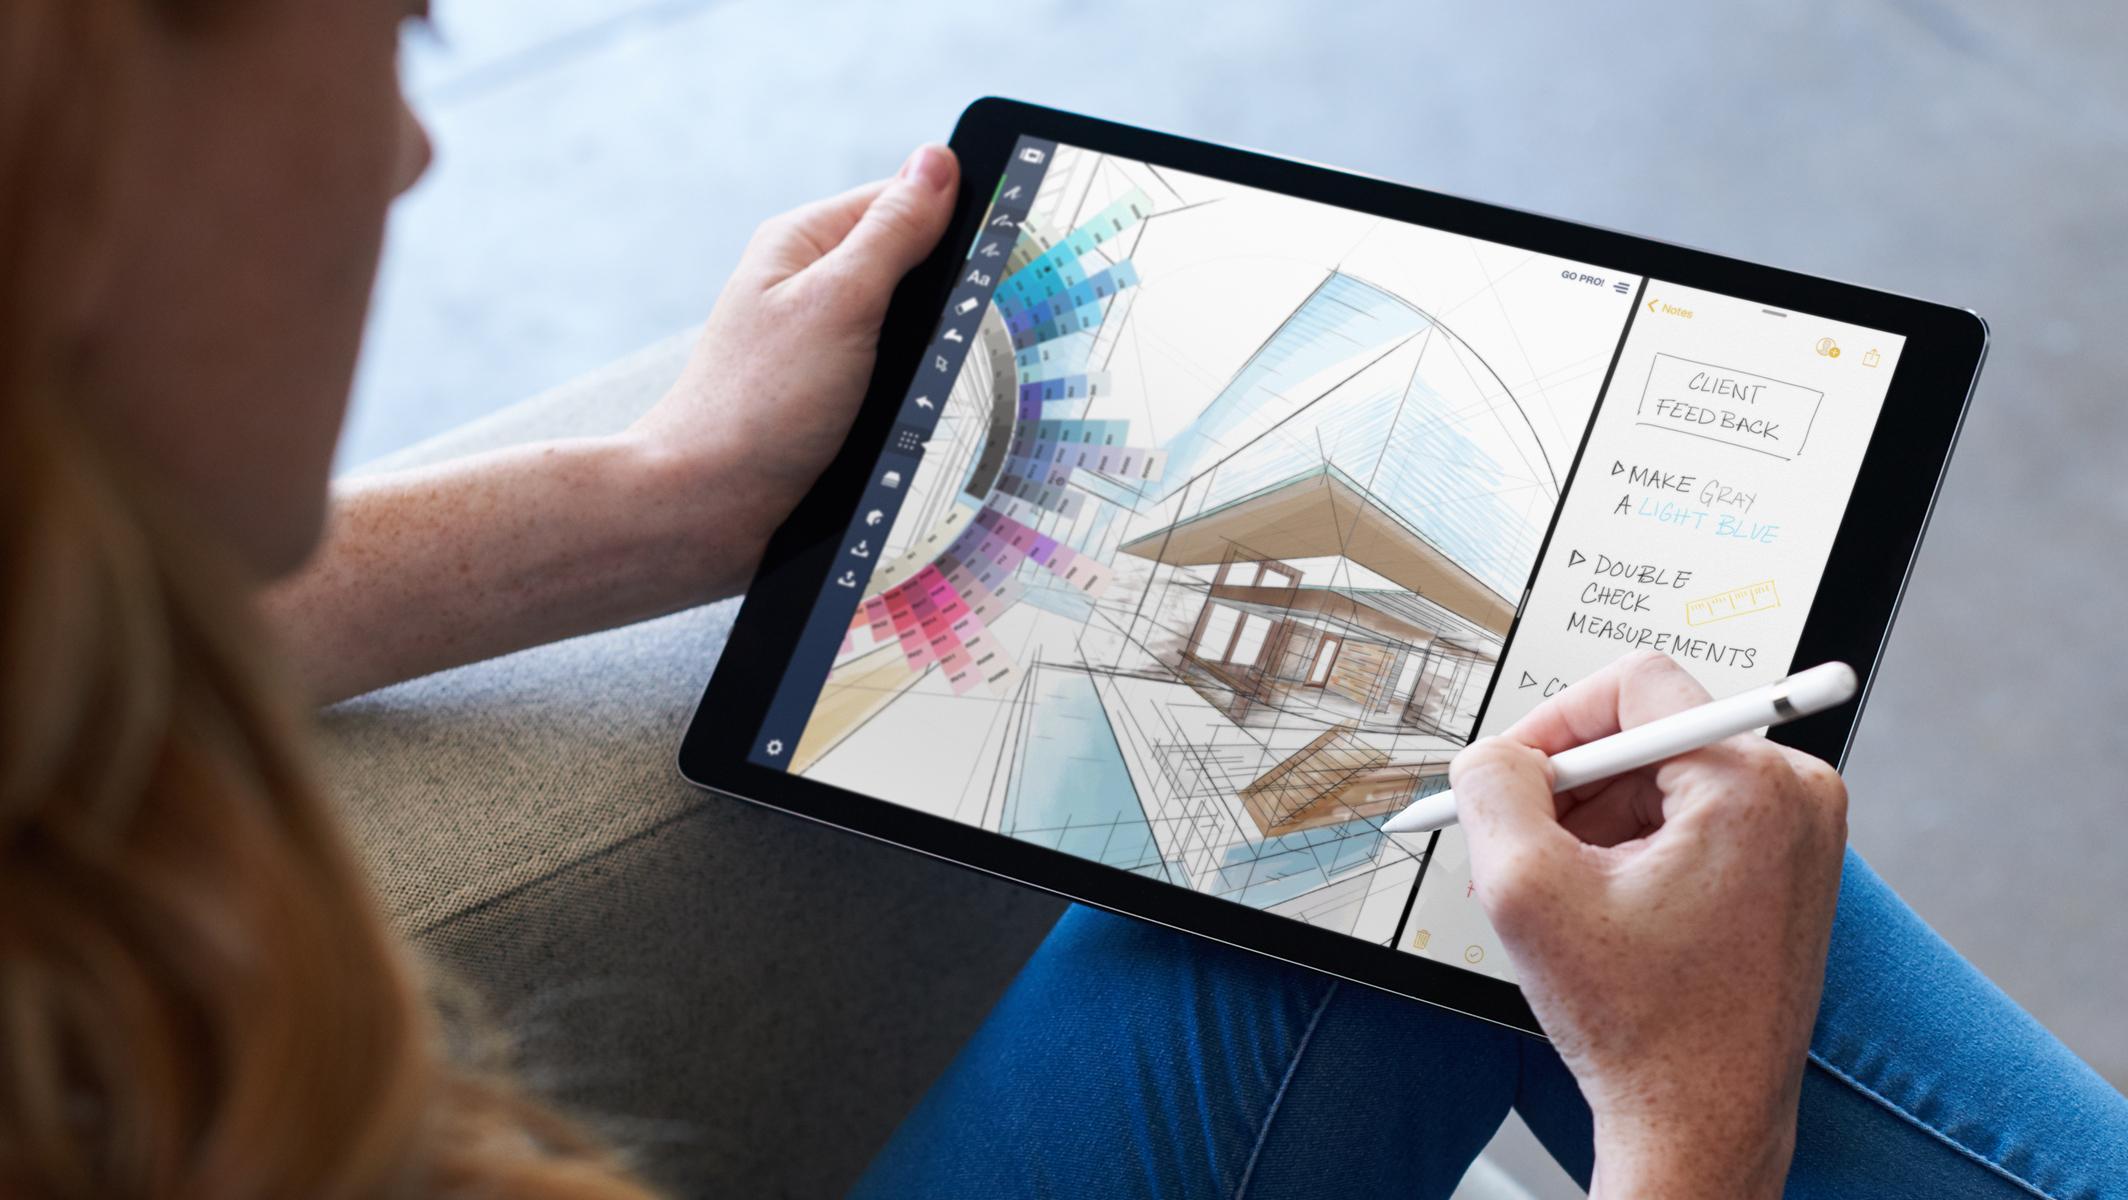 The biggest changes come to the iPad, which gets features like multitasking